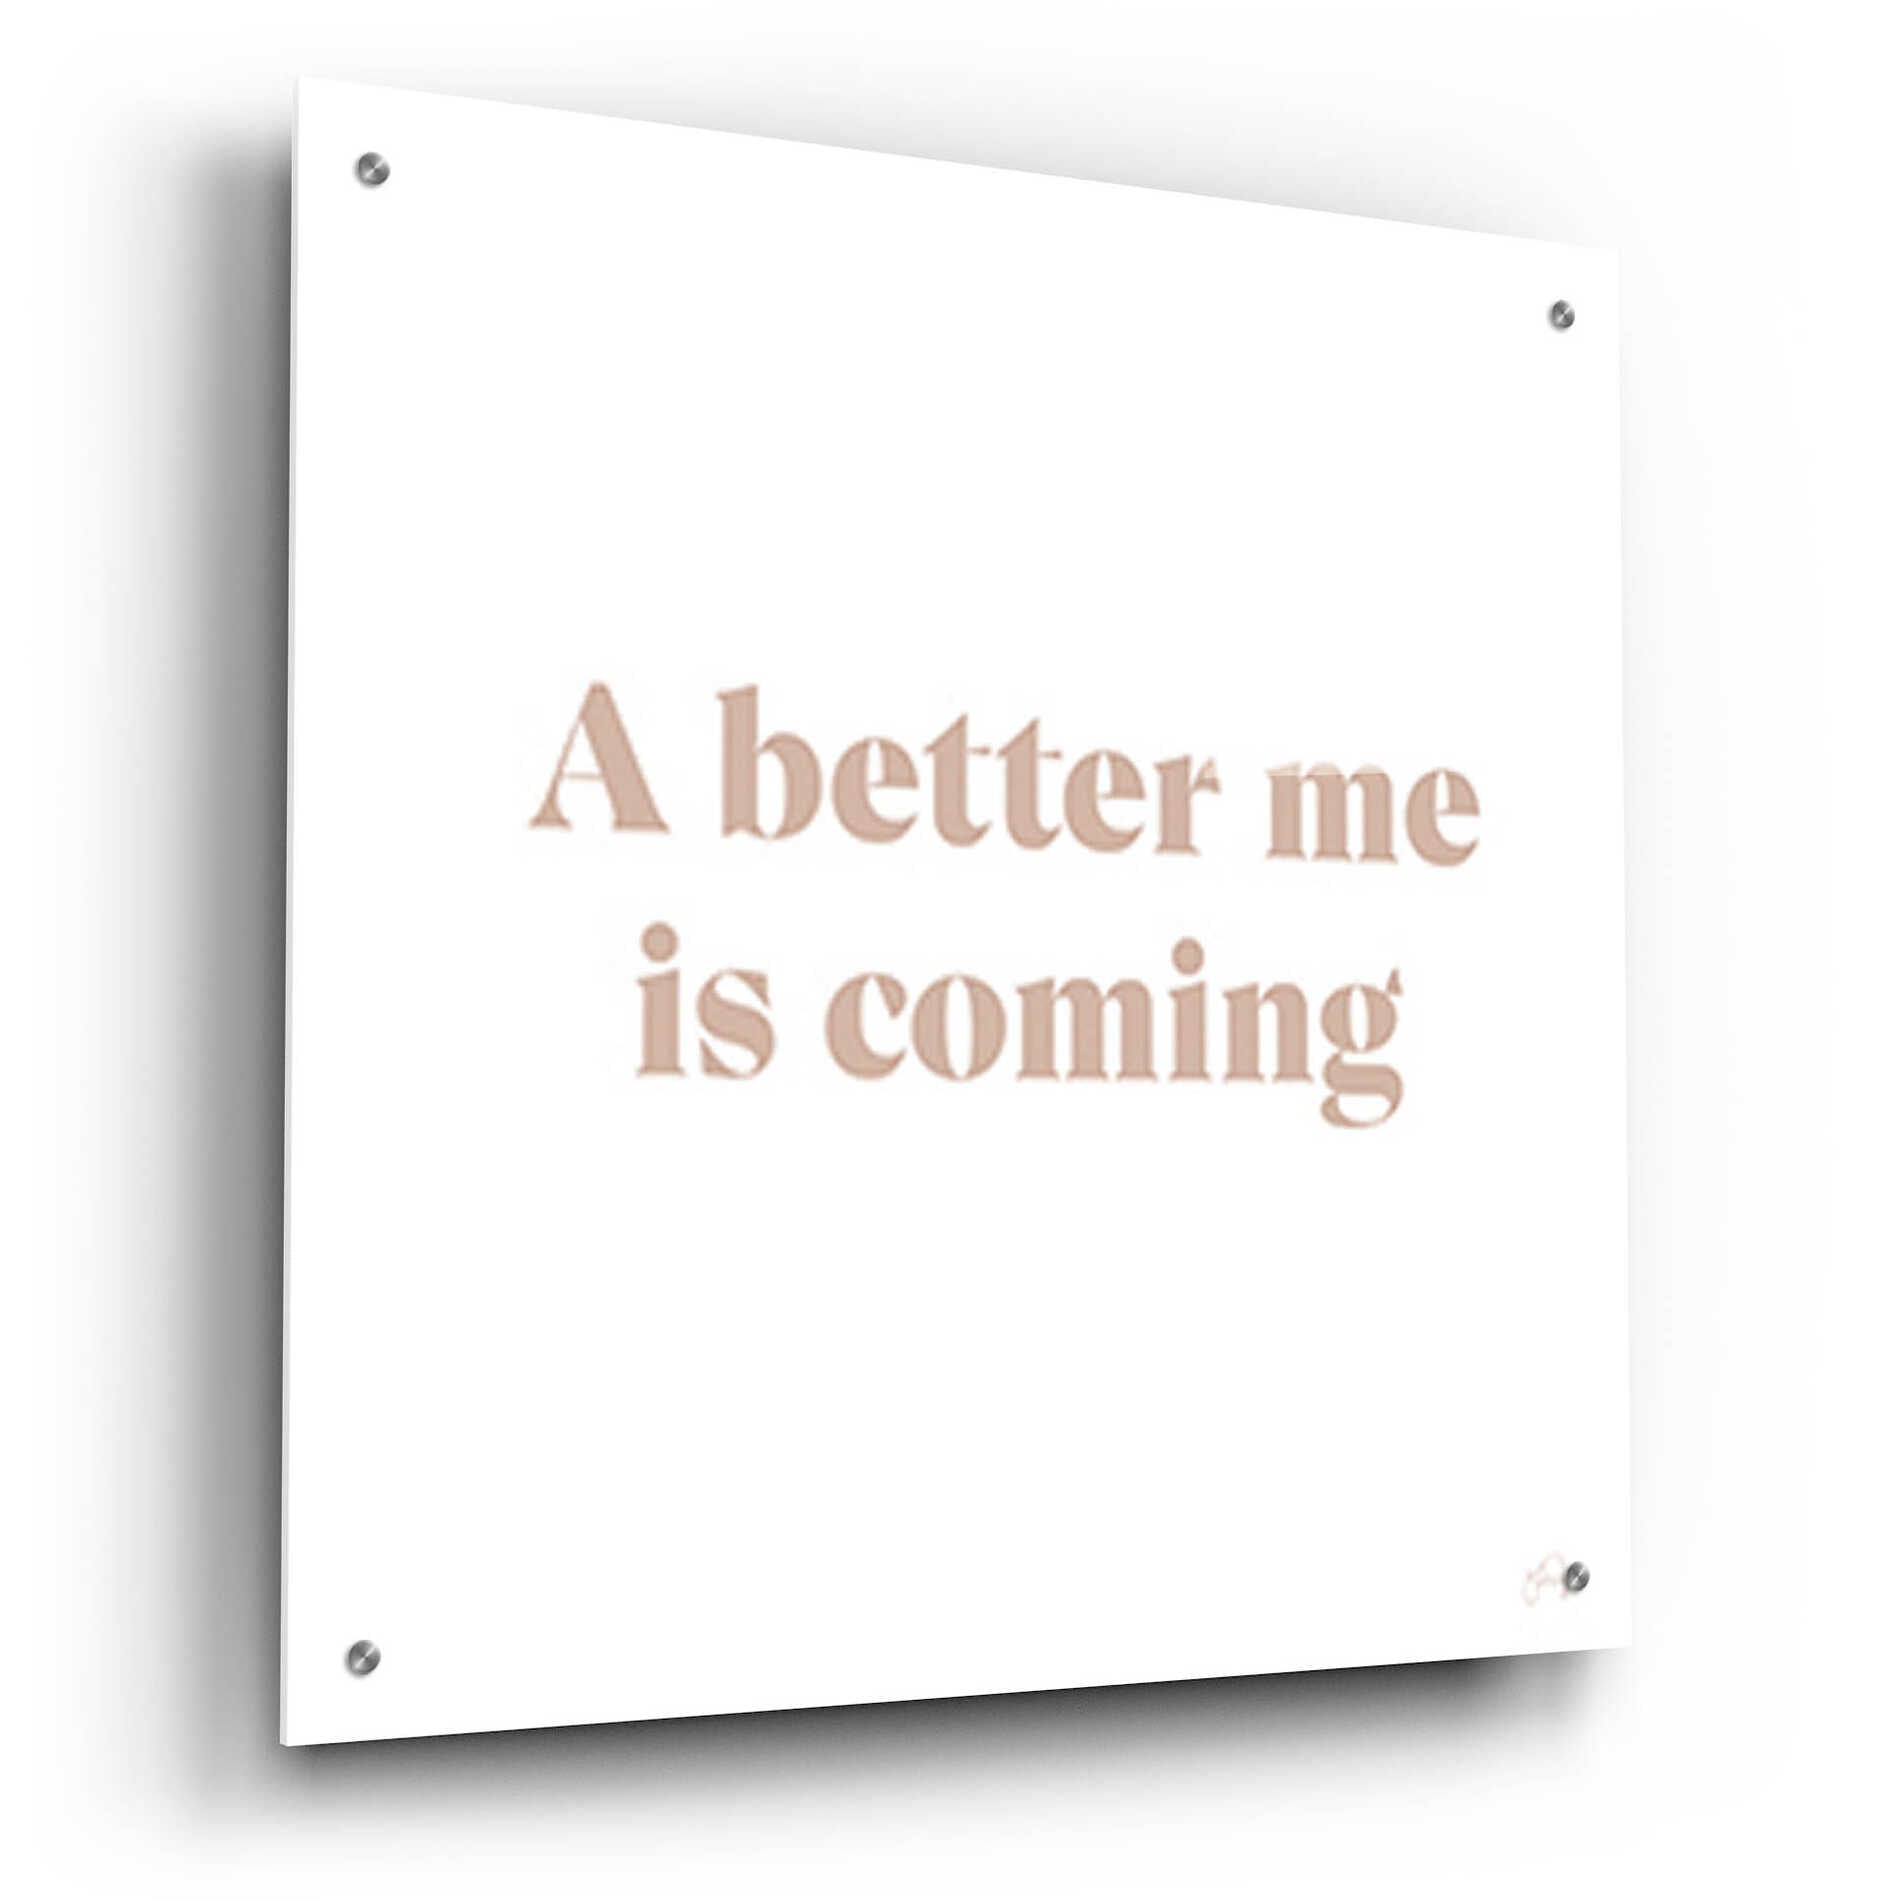 Epic Art 'A Better Me is Coming' by Yass Naffas Designs, Acrylic Glass Wall Art,24x24